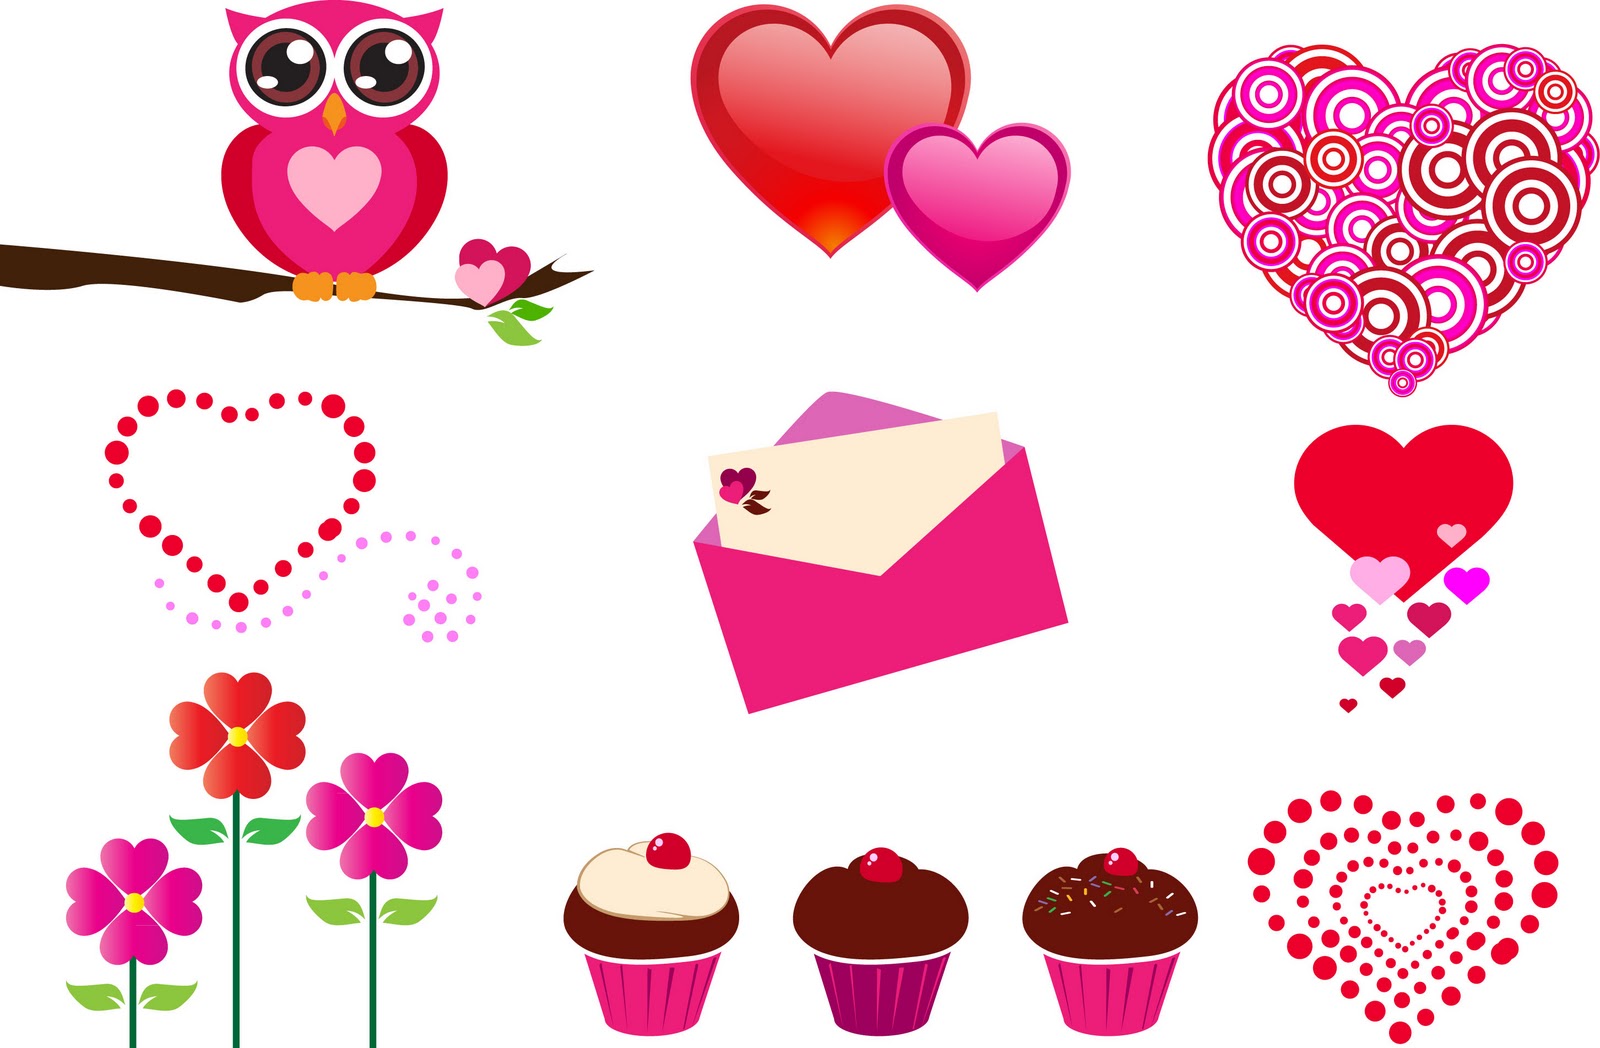 6 Best Images of Valentine Clip Art Free Printable - Free ...